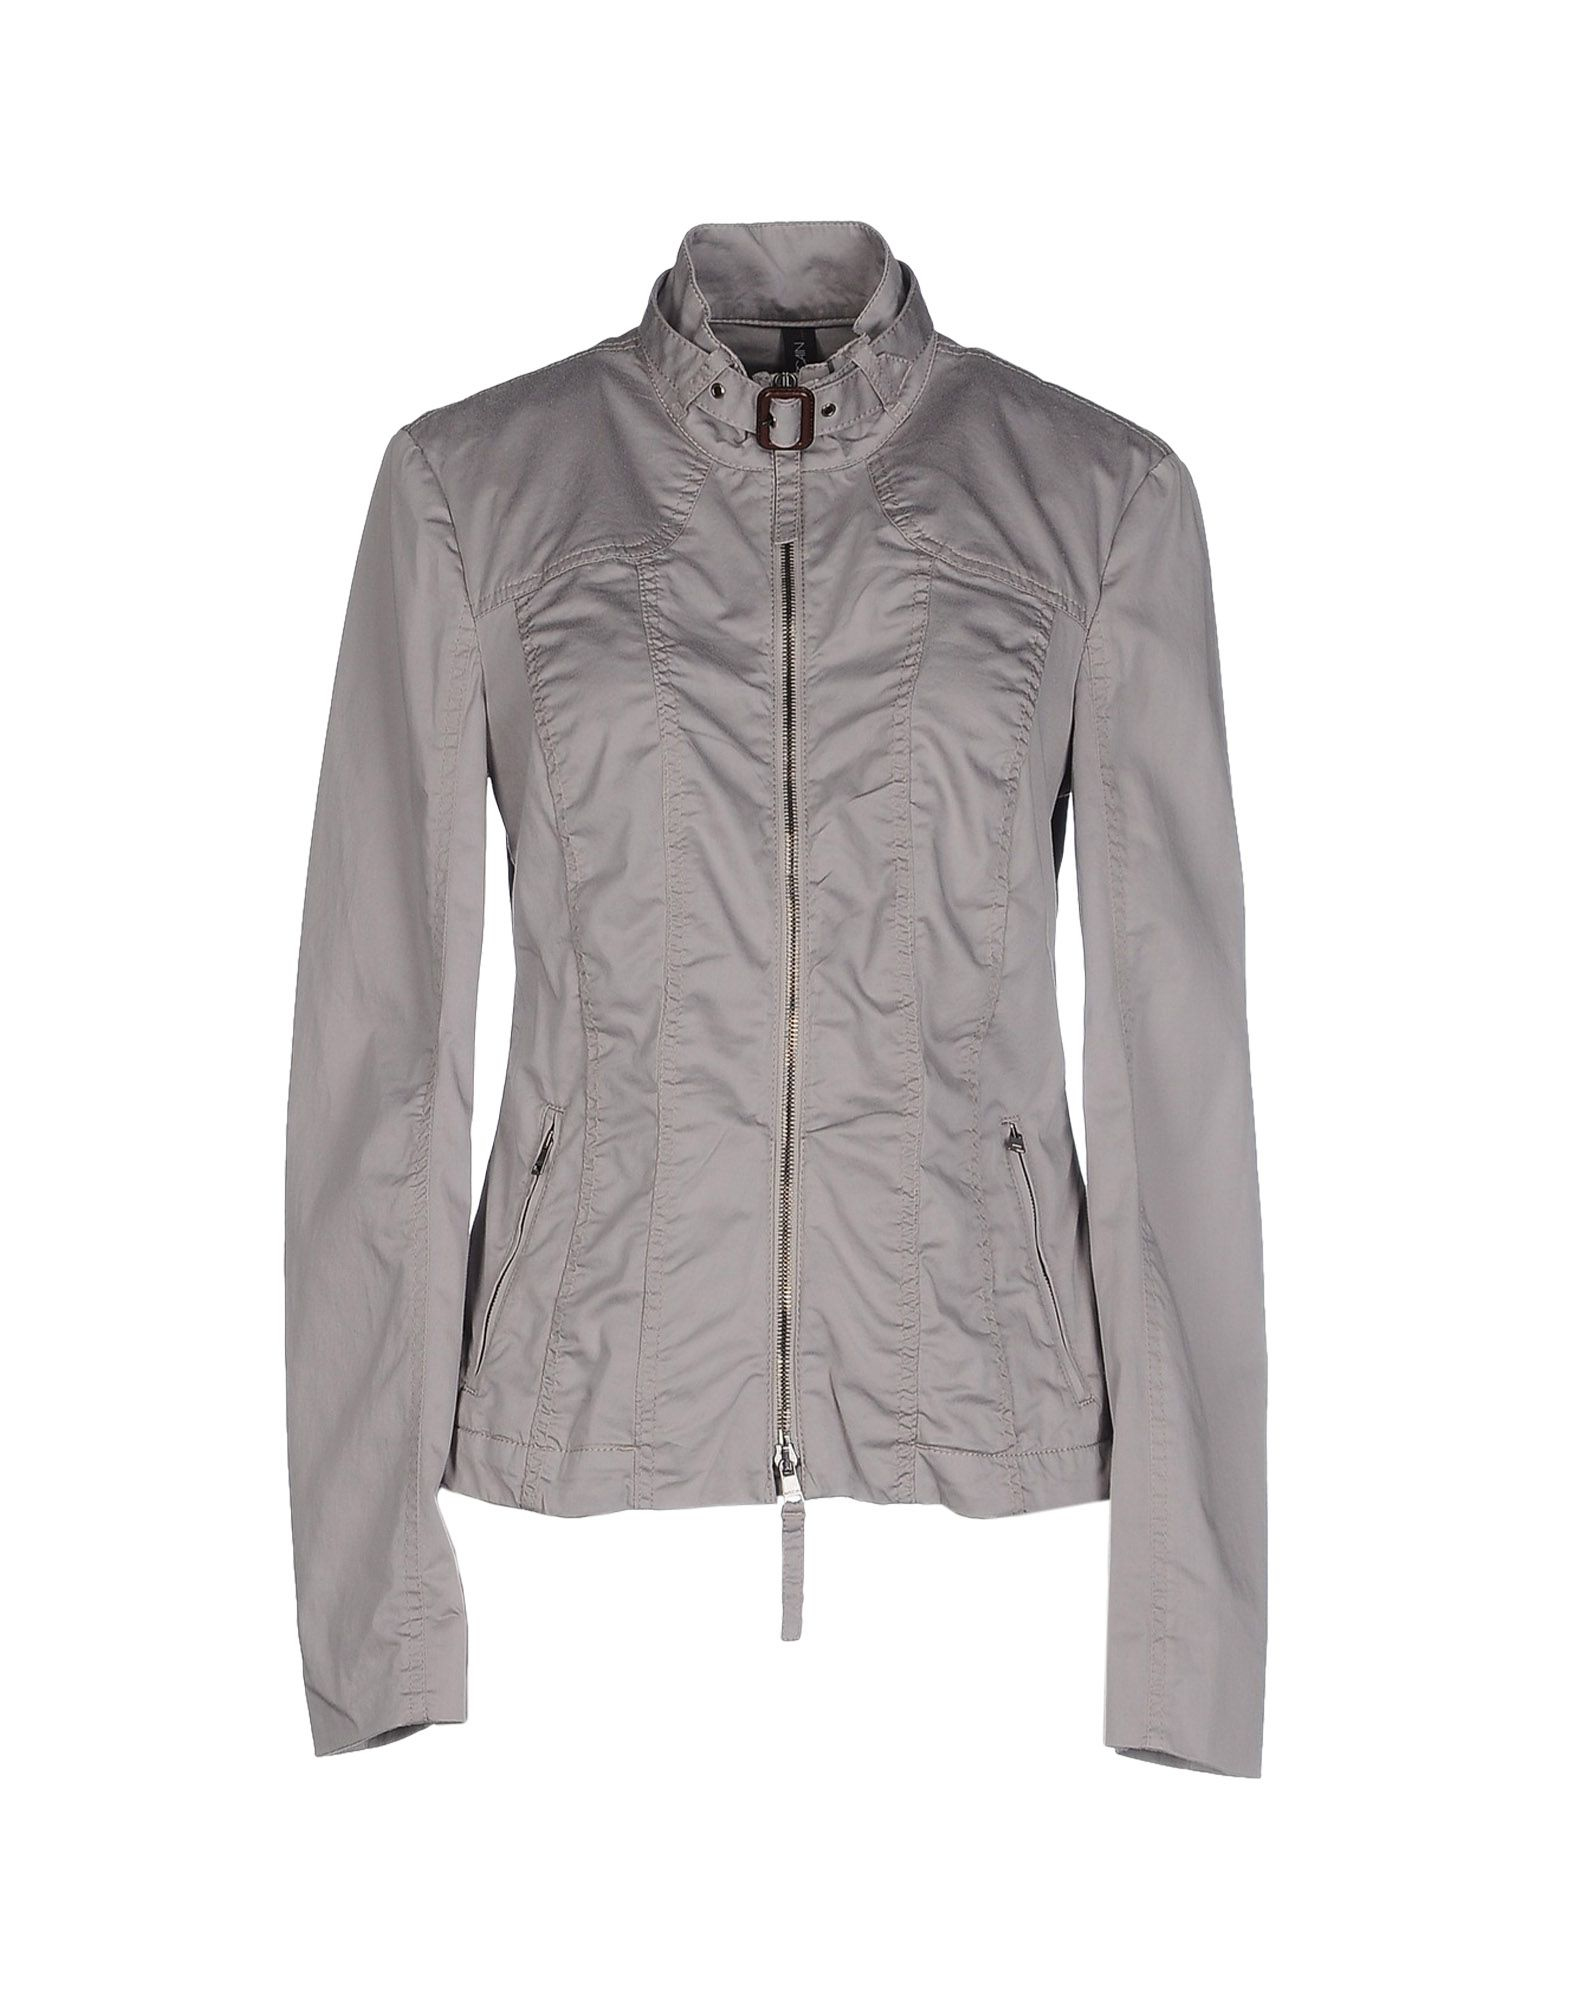 Lyst - Marc Cain Jacket in Gray